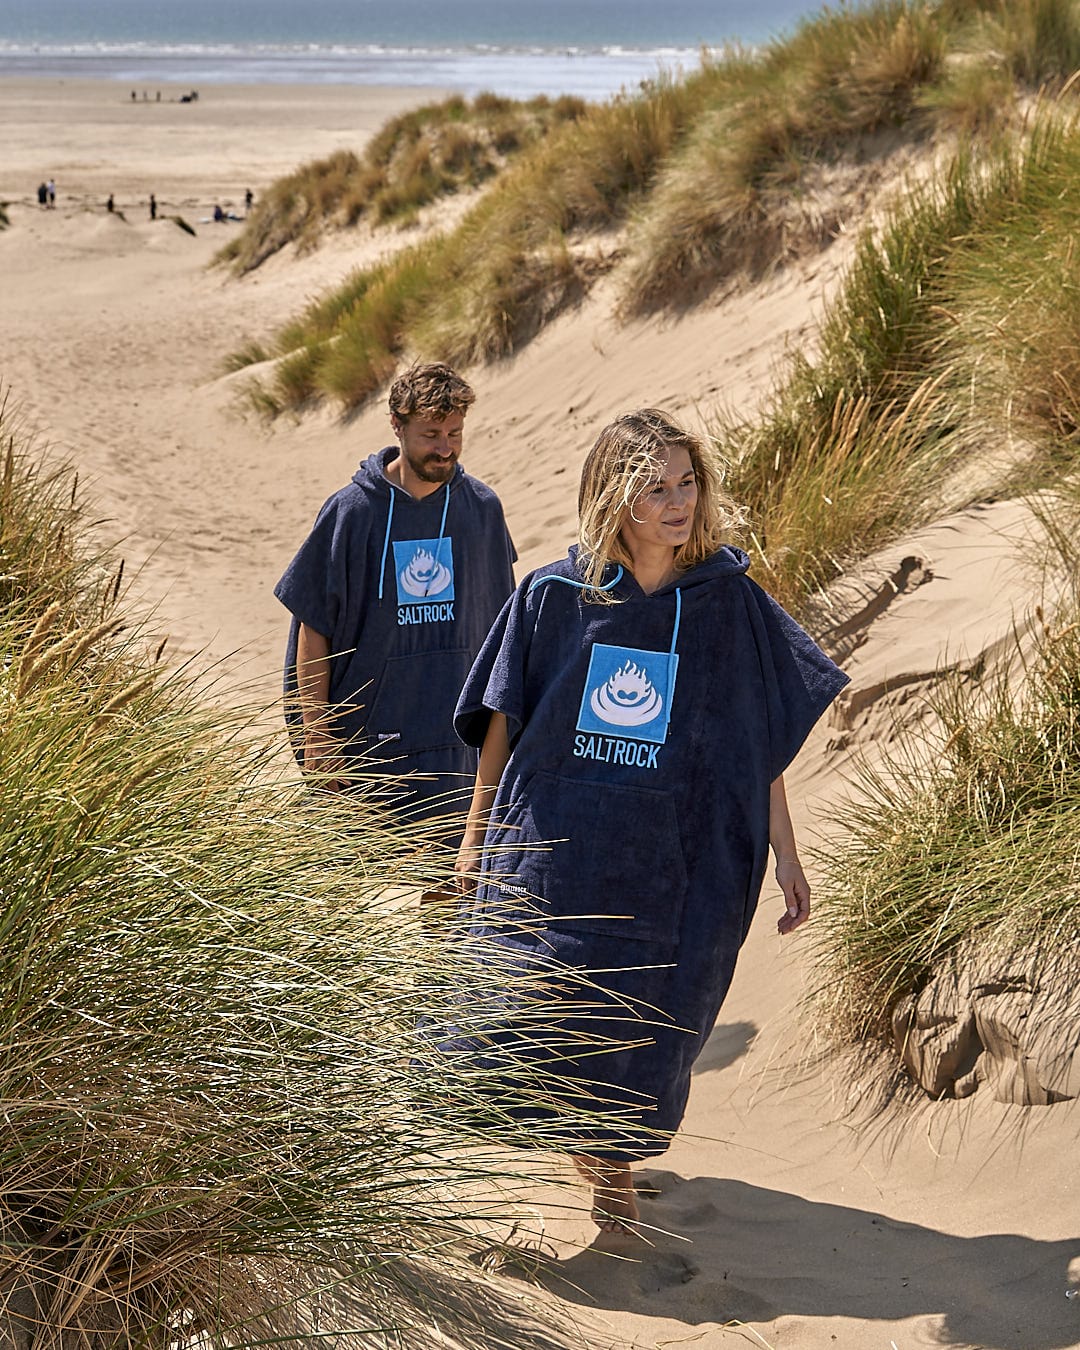 Two people walking through a sand dune on a beach while carrying the Saltrock Corp - Changing Towel - Blue.